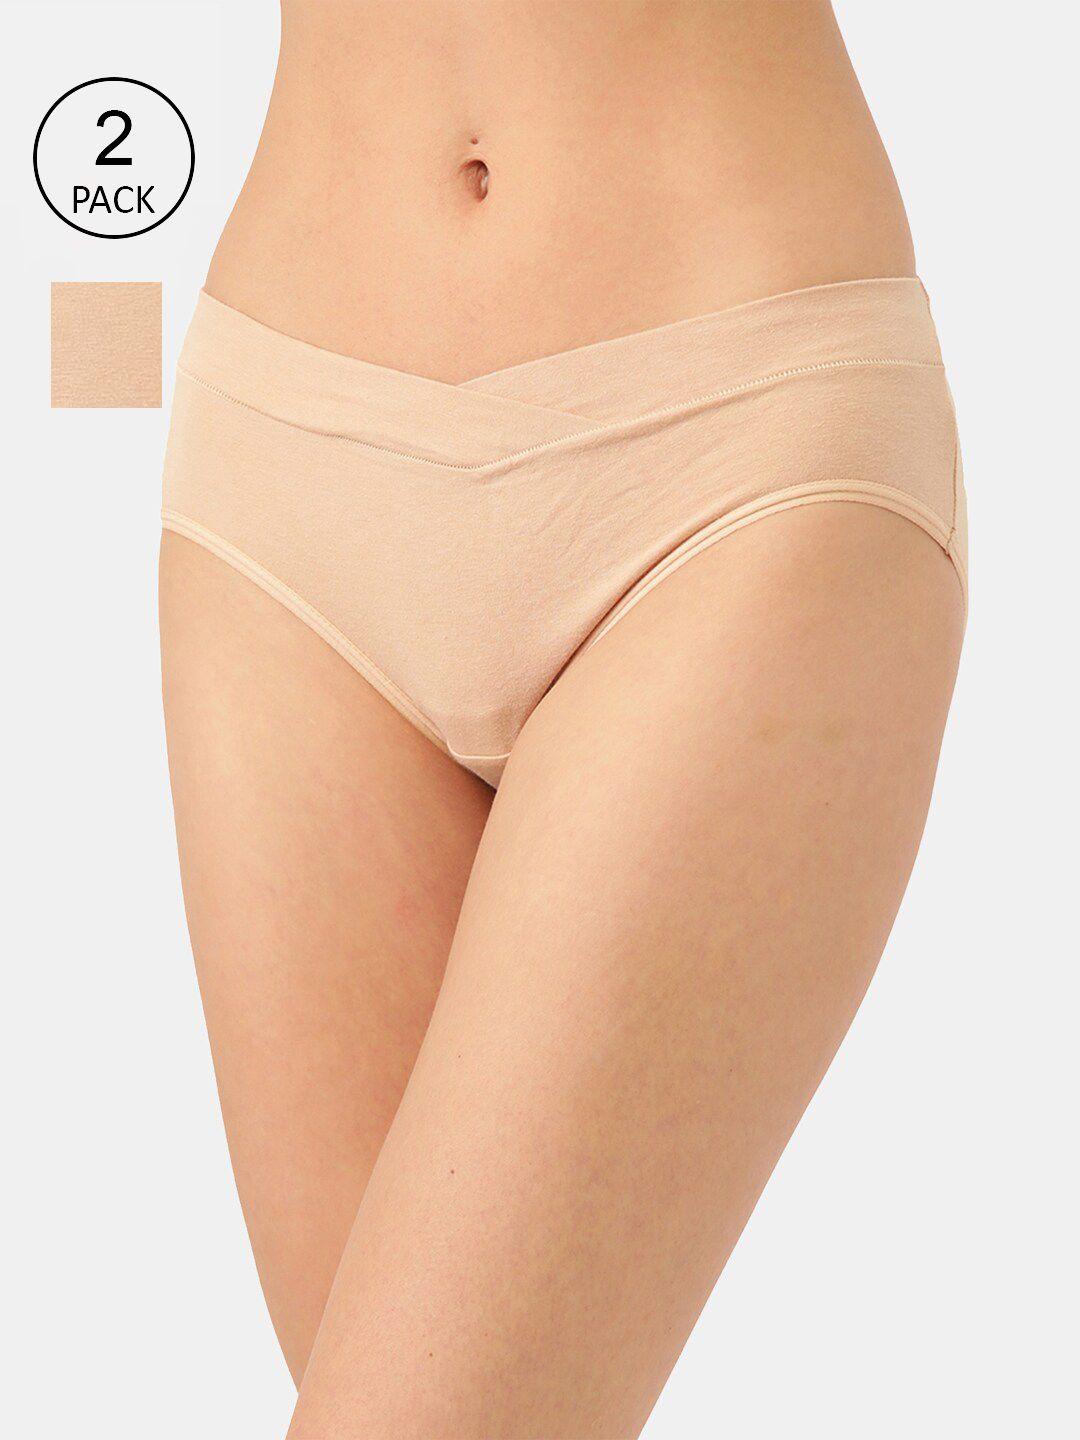 inner-sense-women-pack-of-2-beige-solid-organic-cotton-antimicrobial-v-band-maternity-briefs